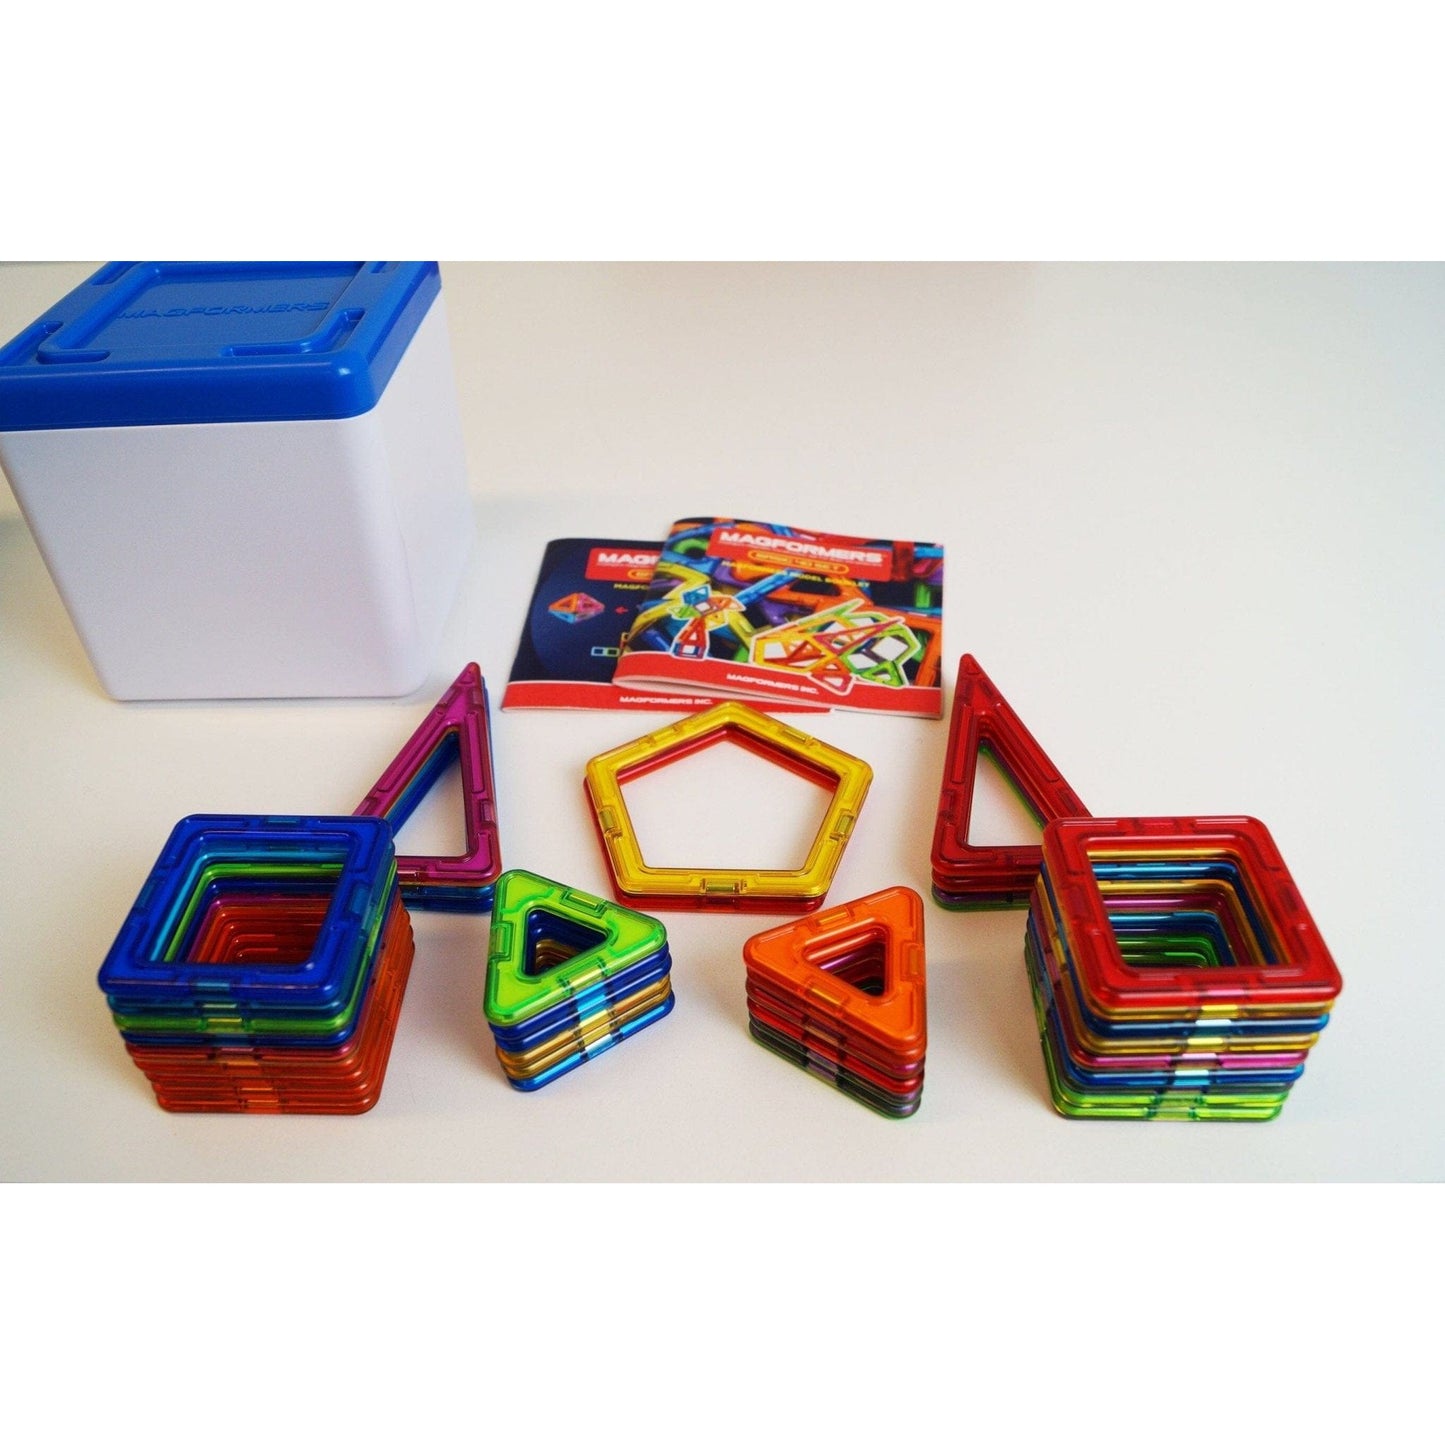 Magformers Construction Toys Basic 42 Piece Set + Storage Box pieces stacked on tabletop